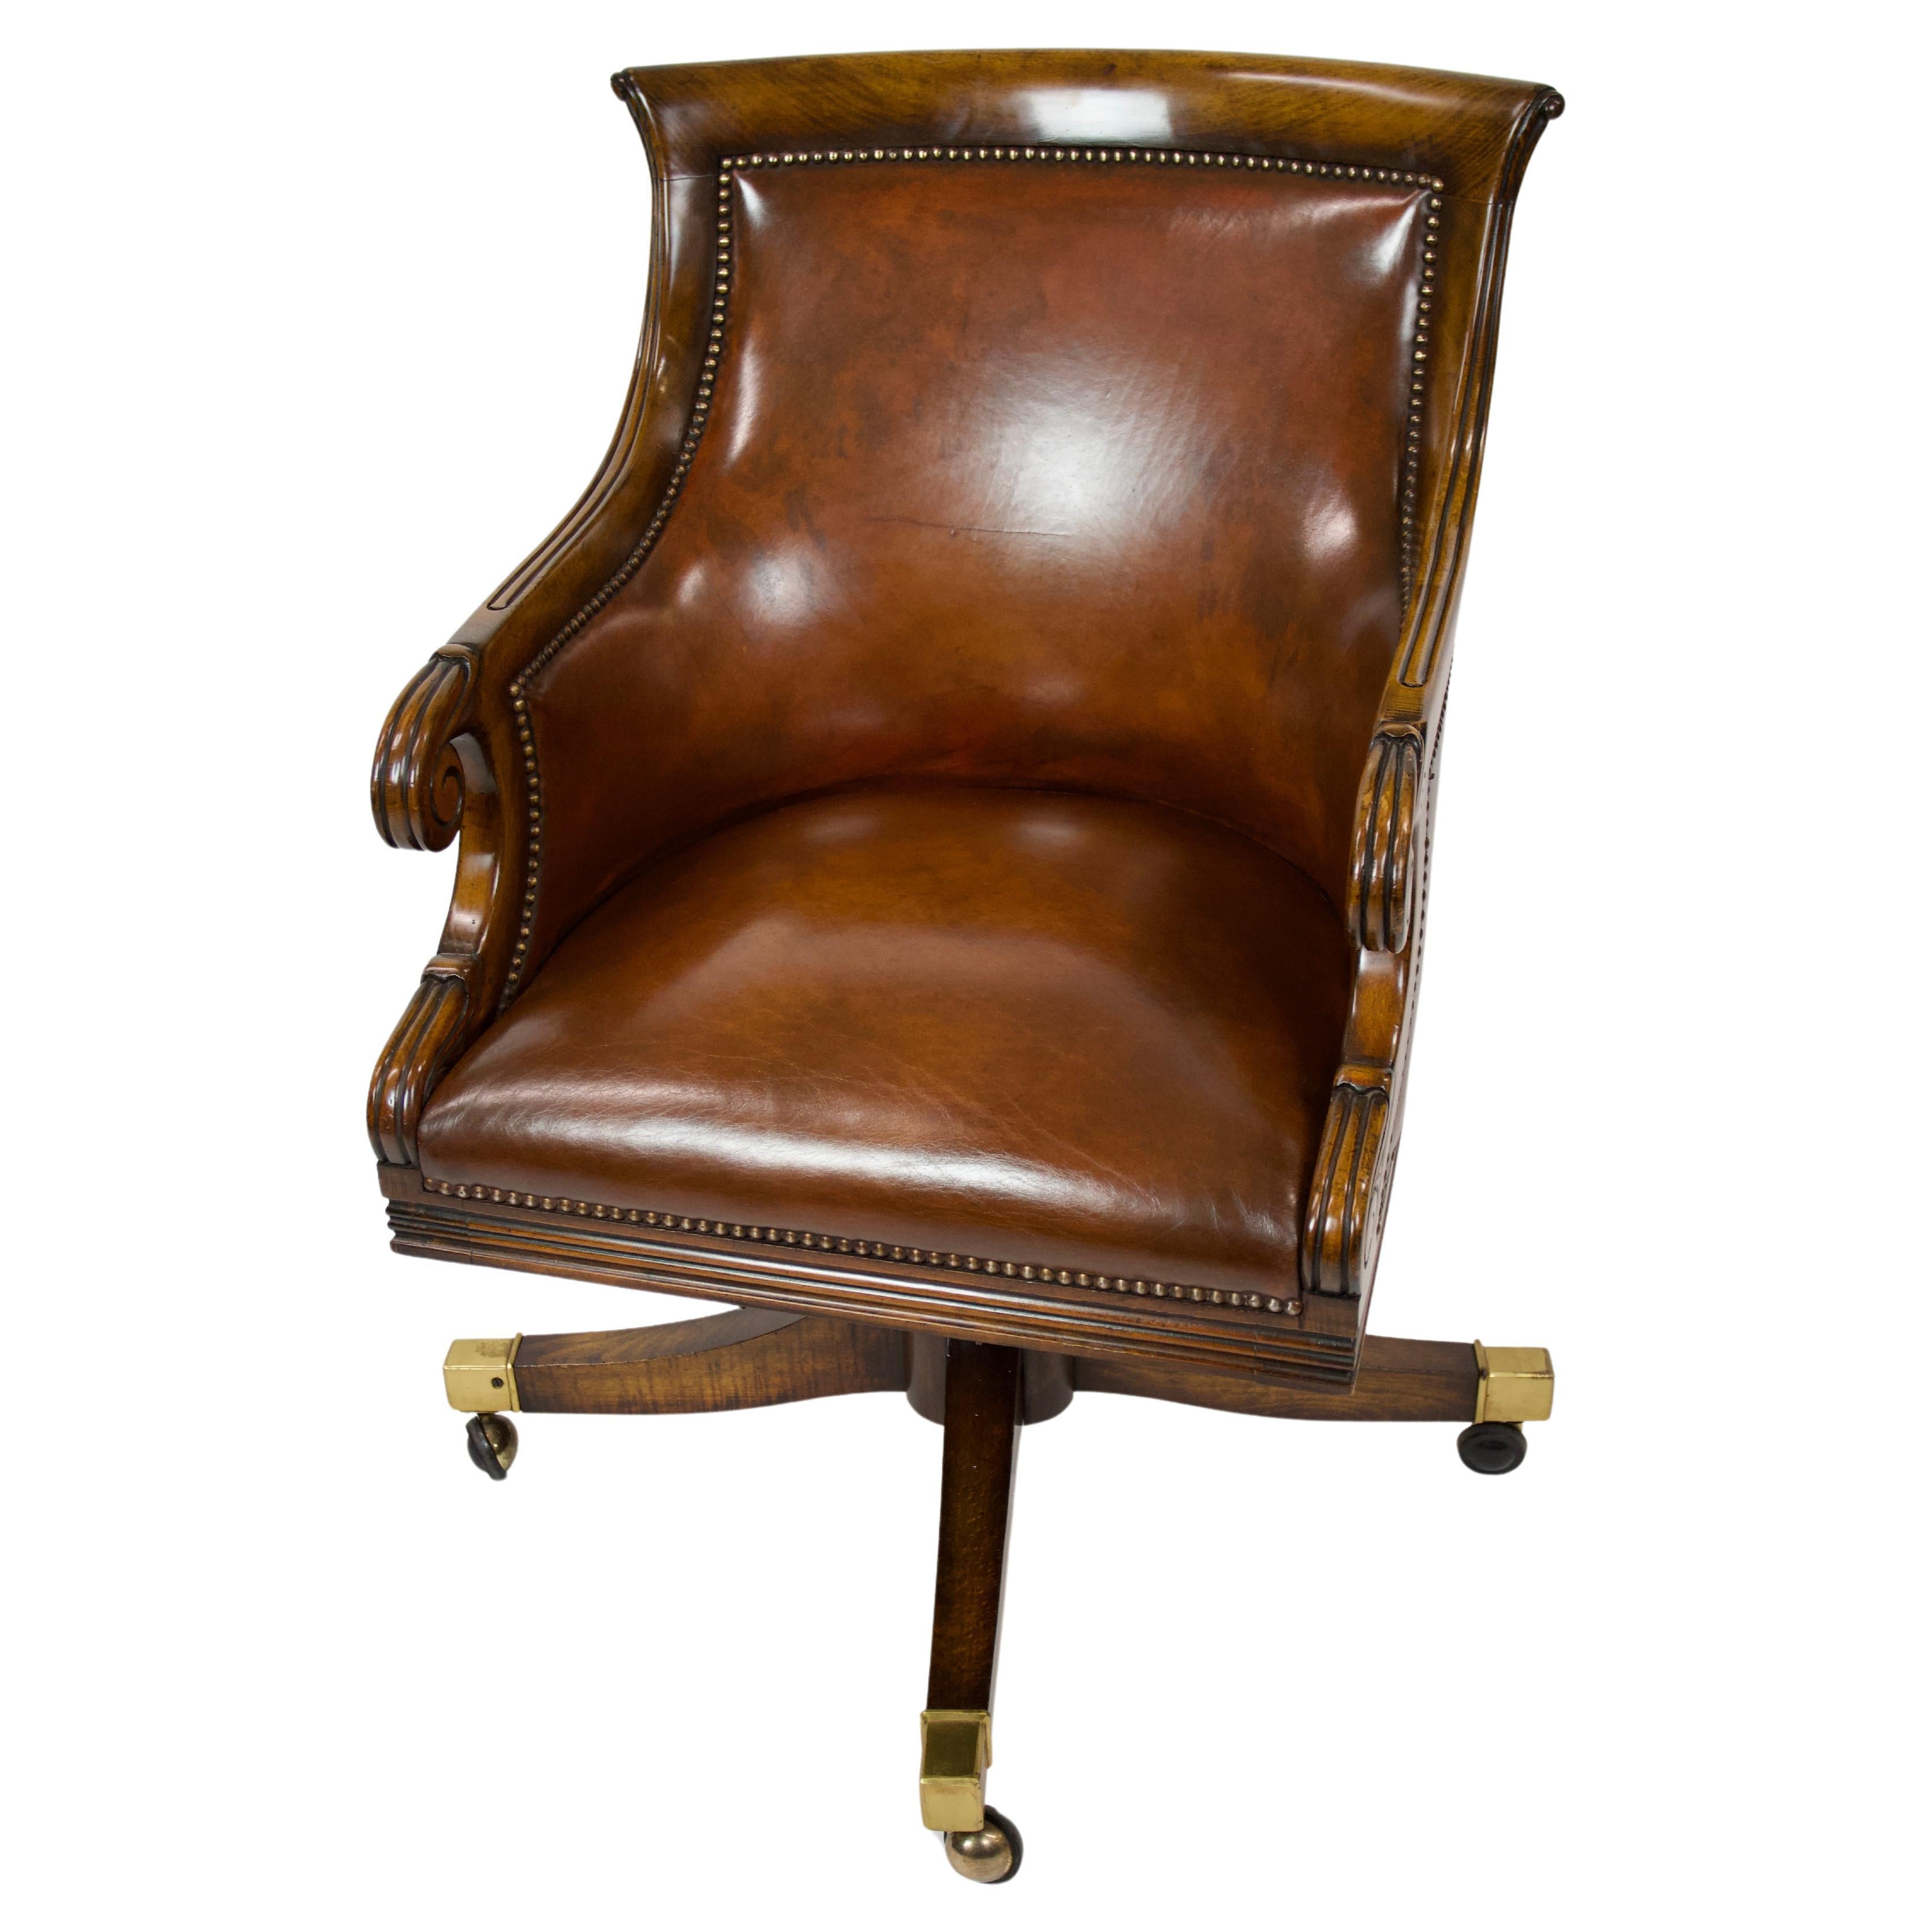  Fine W1V Style Mahogany & leather desk chair For Sale